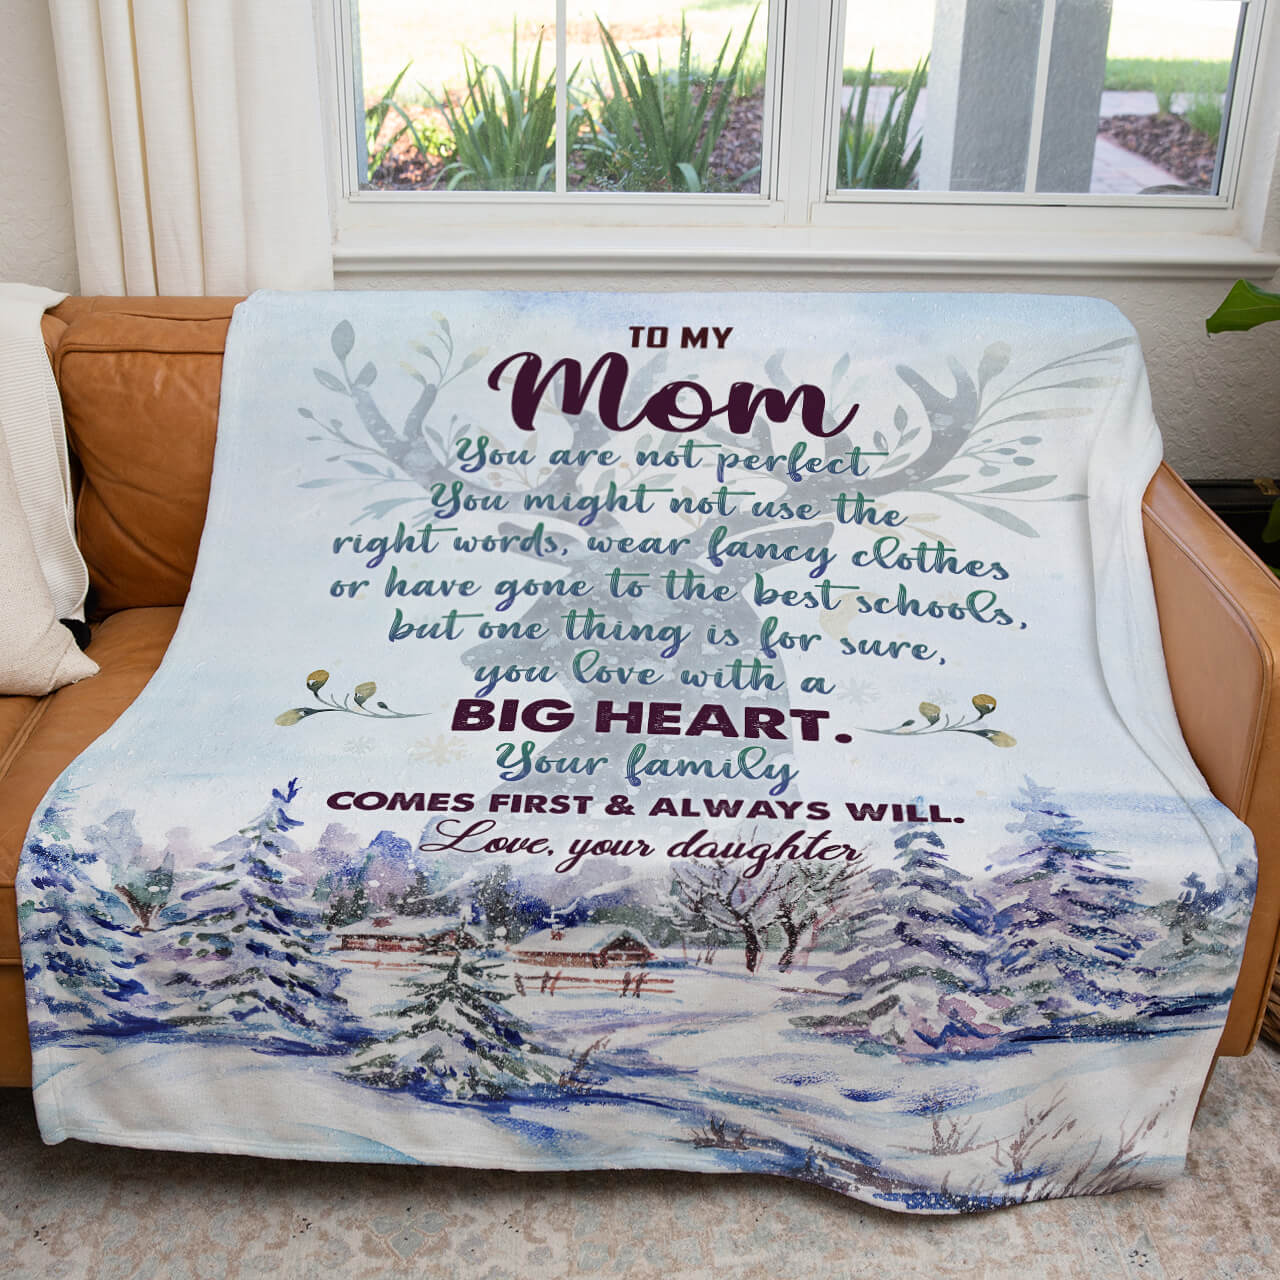 To My Mom Christmas Blanket, You Love with a Big Heart, Your Family Comes  First Blanket, Best Christmas Gifts for Mom from Daughter - Sweet Family  Gift